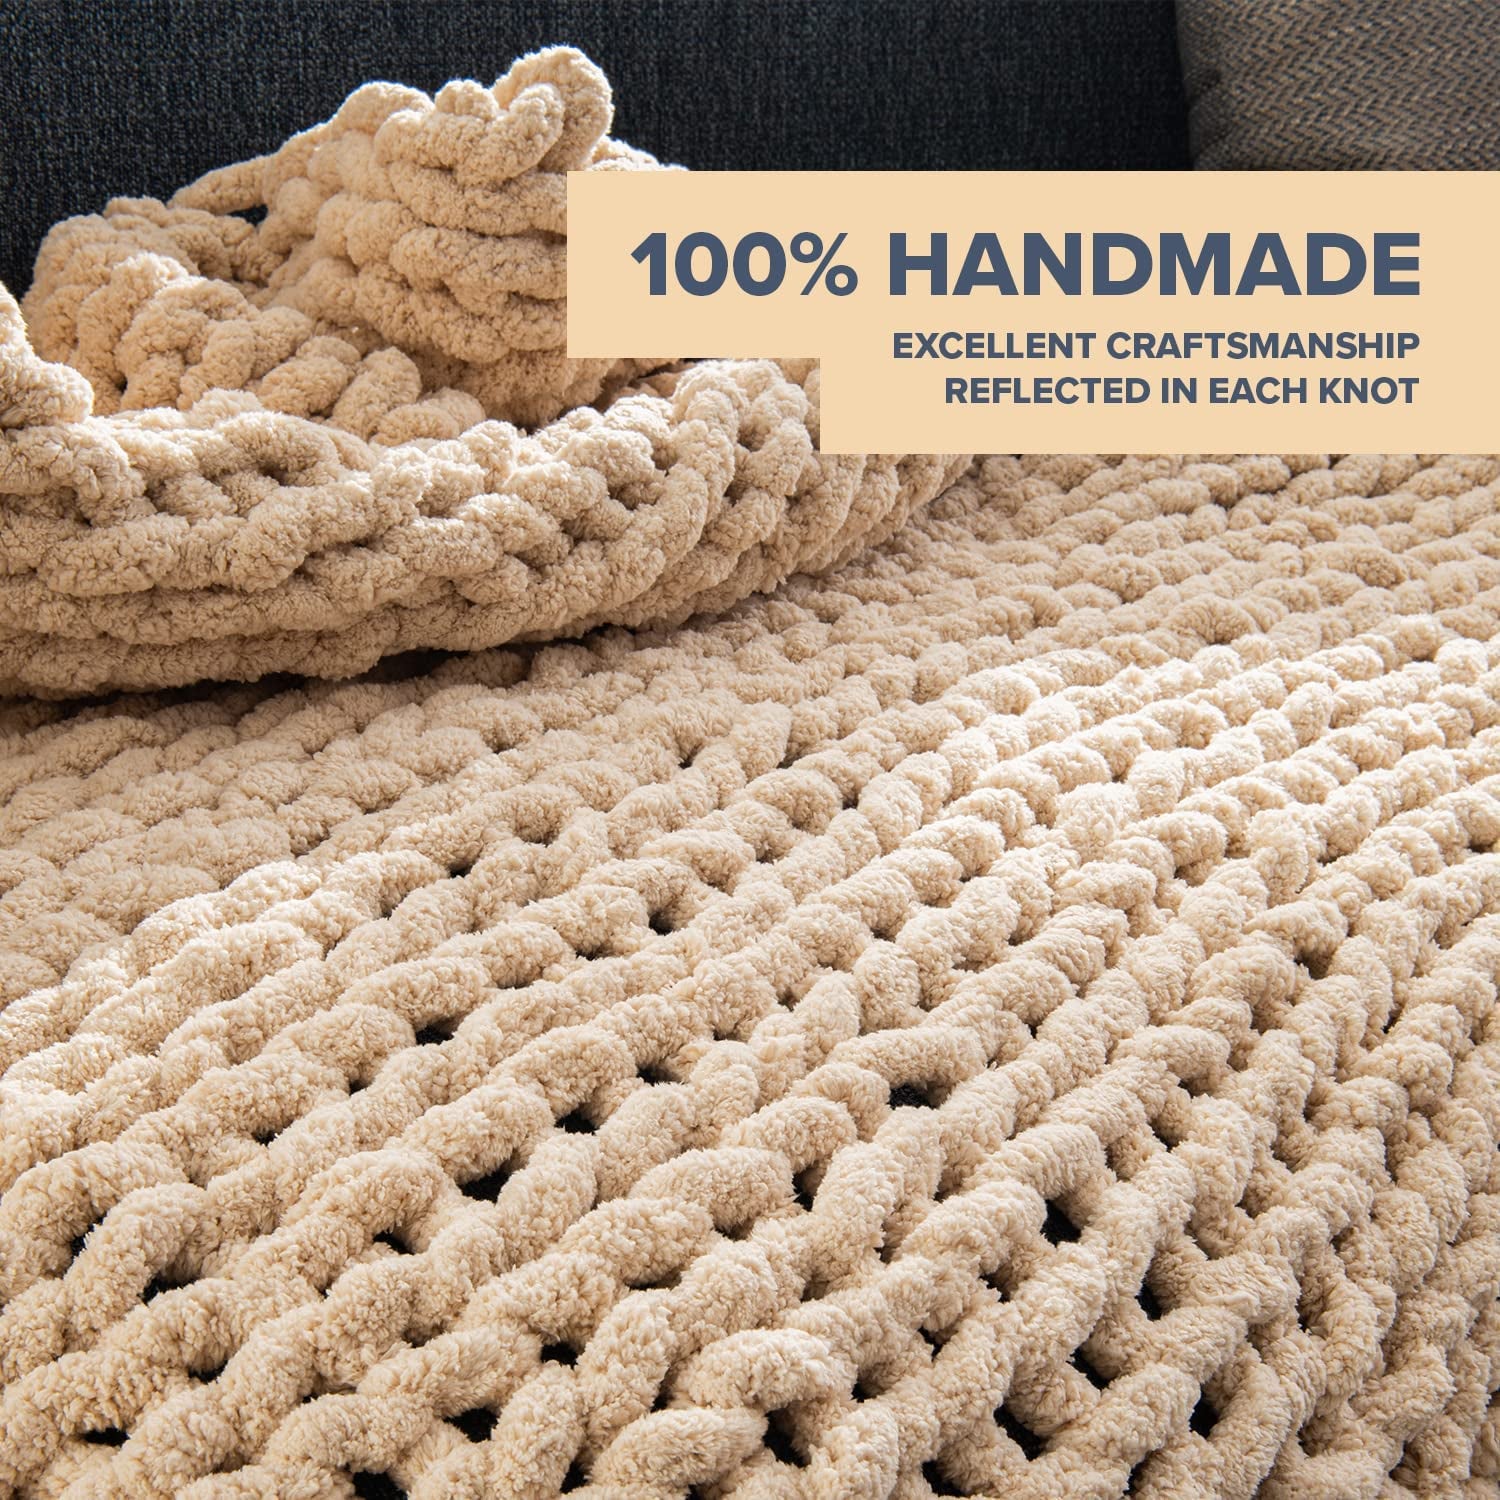 Handmade Chenille Yarn Knitted Blanket - 50"X60" - 3.7 Lbs. - Machine Washable - Cable Knit Throw Blanket for Couch, Bed (Oat White)